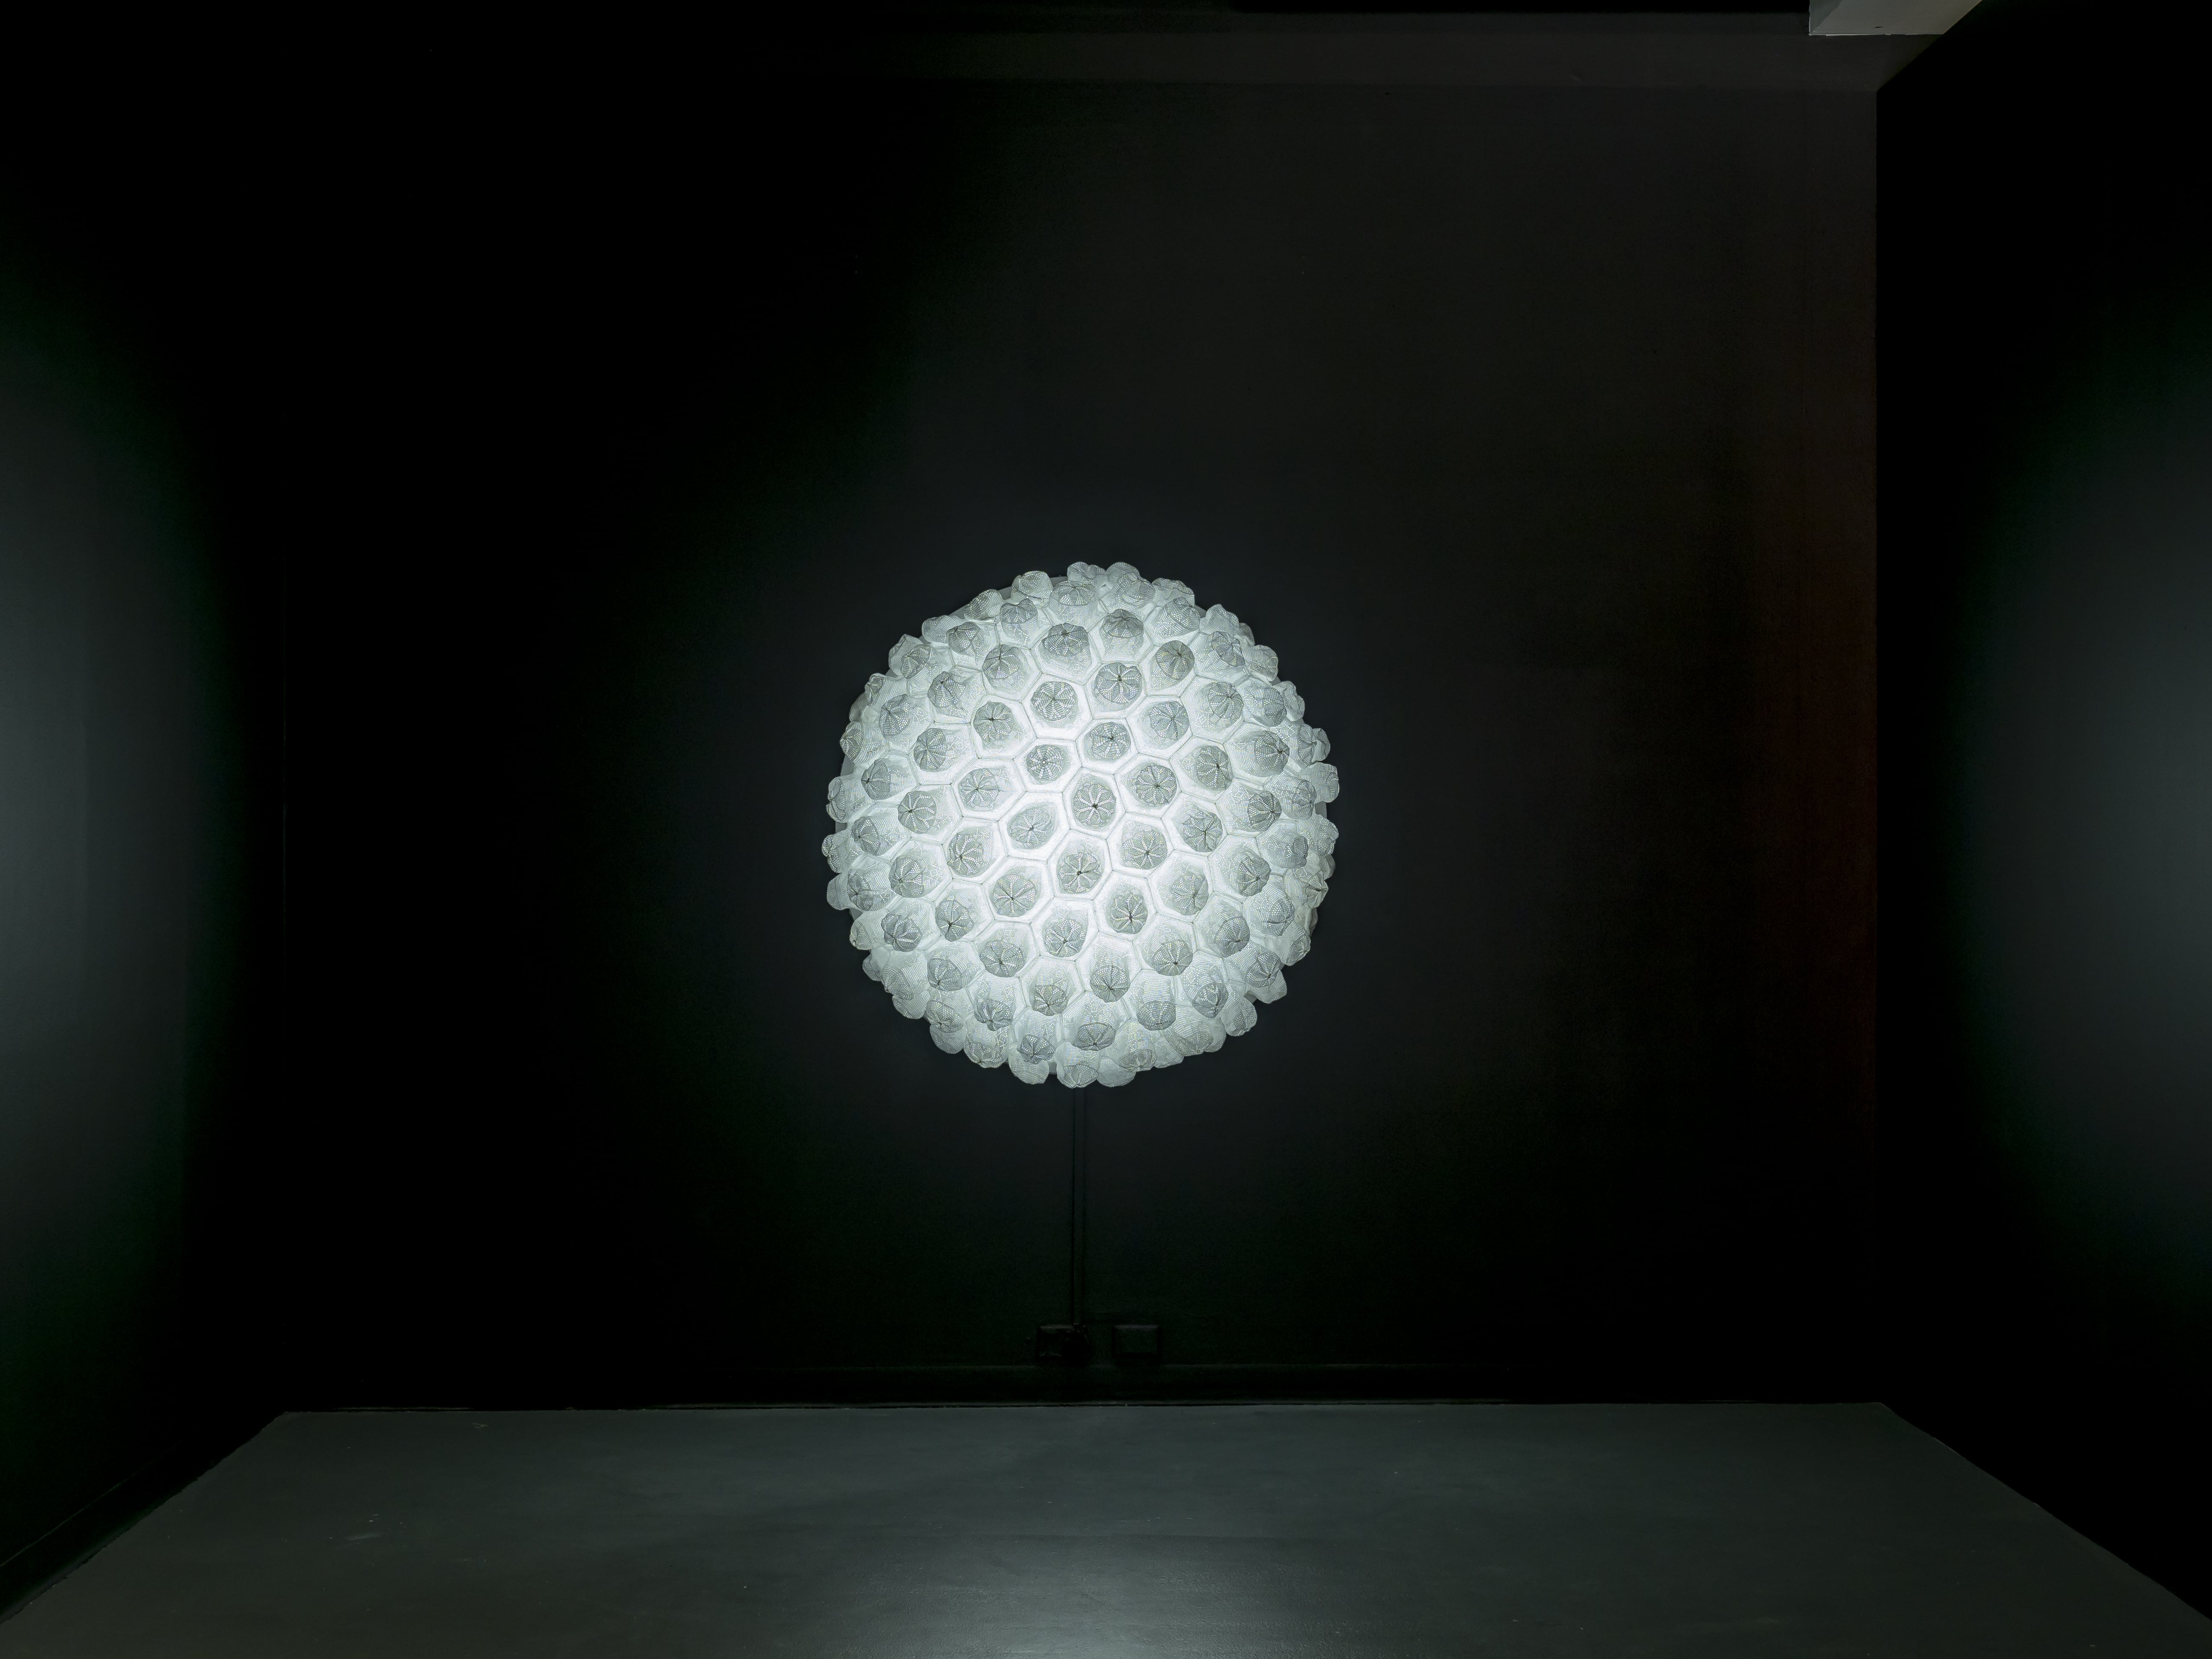 Image 03: Abdullah M. I. Syed, Aura II (2013), installation view, hand-stitched white crocheted prayer caps (topi), Perspex and LED light, 127 (d) x 54c,. Courtesy the artist.